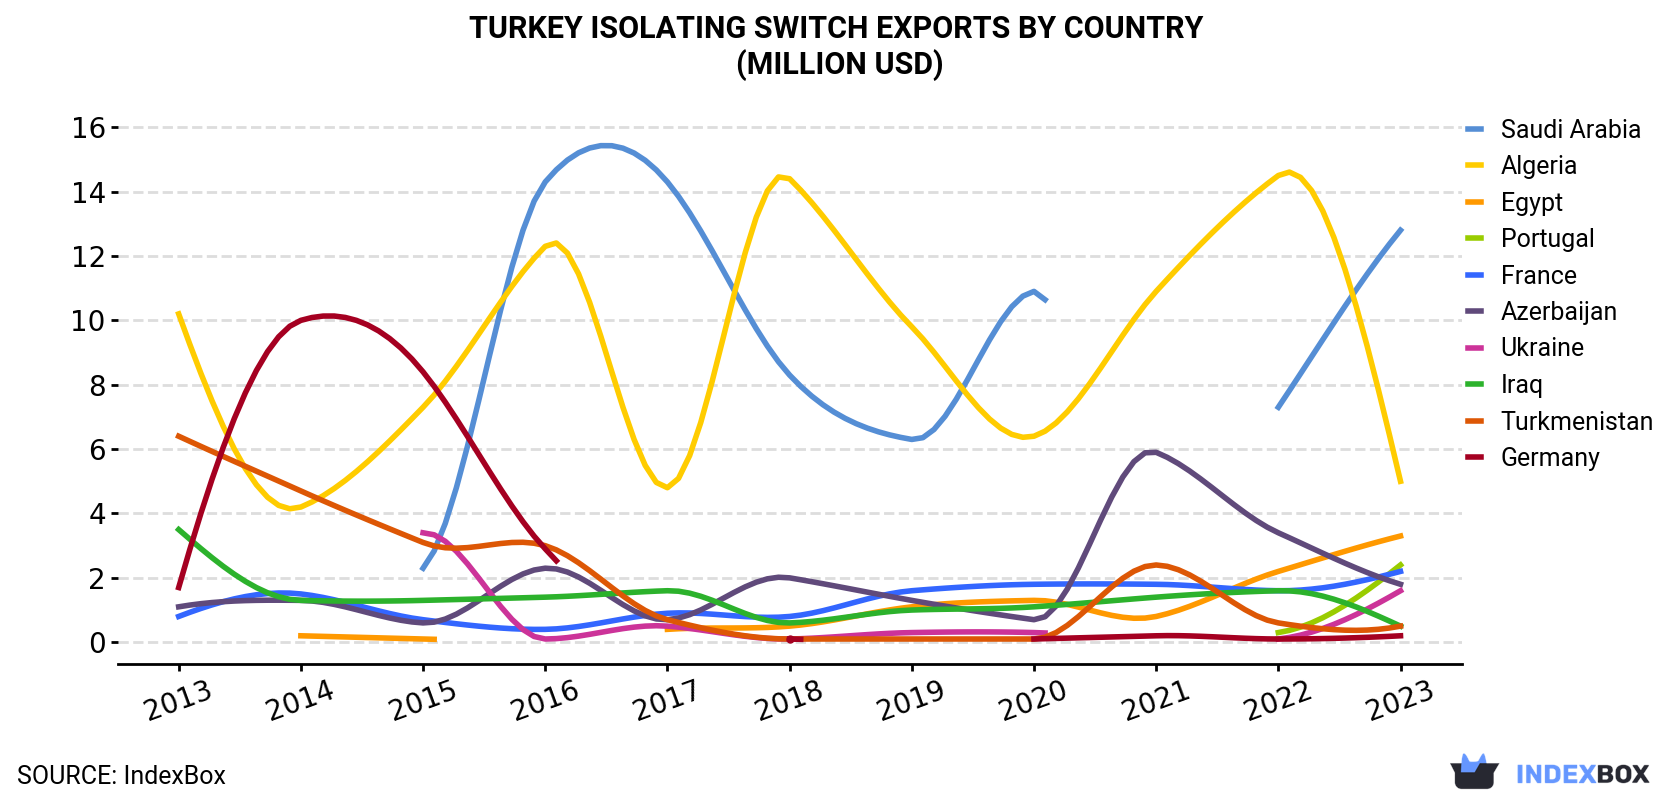 Turkey Isolating Switch Exports By Country (Million USD)